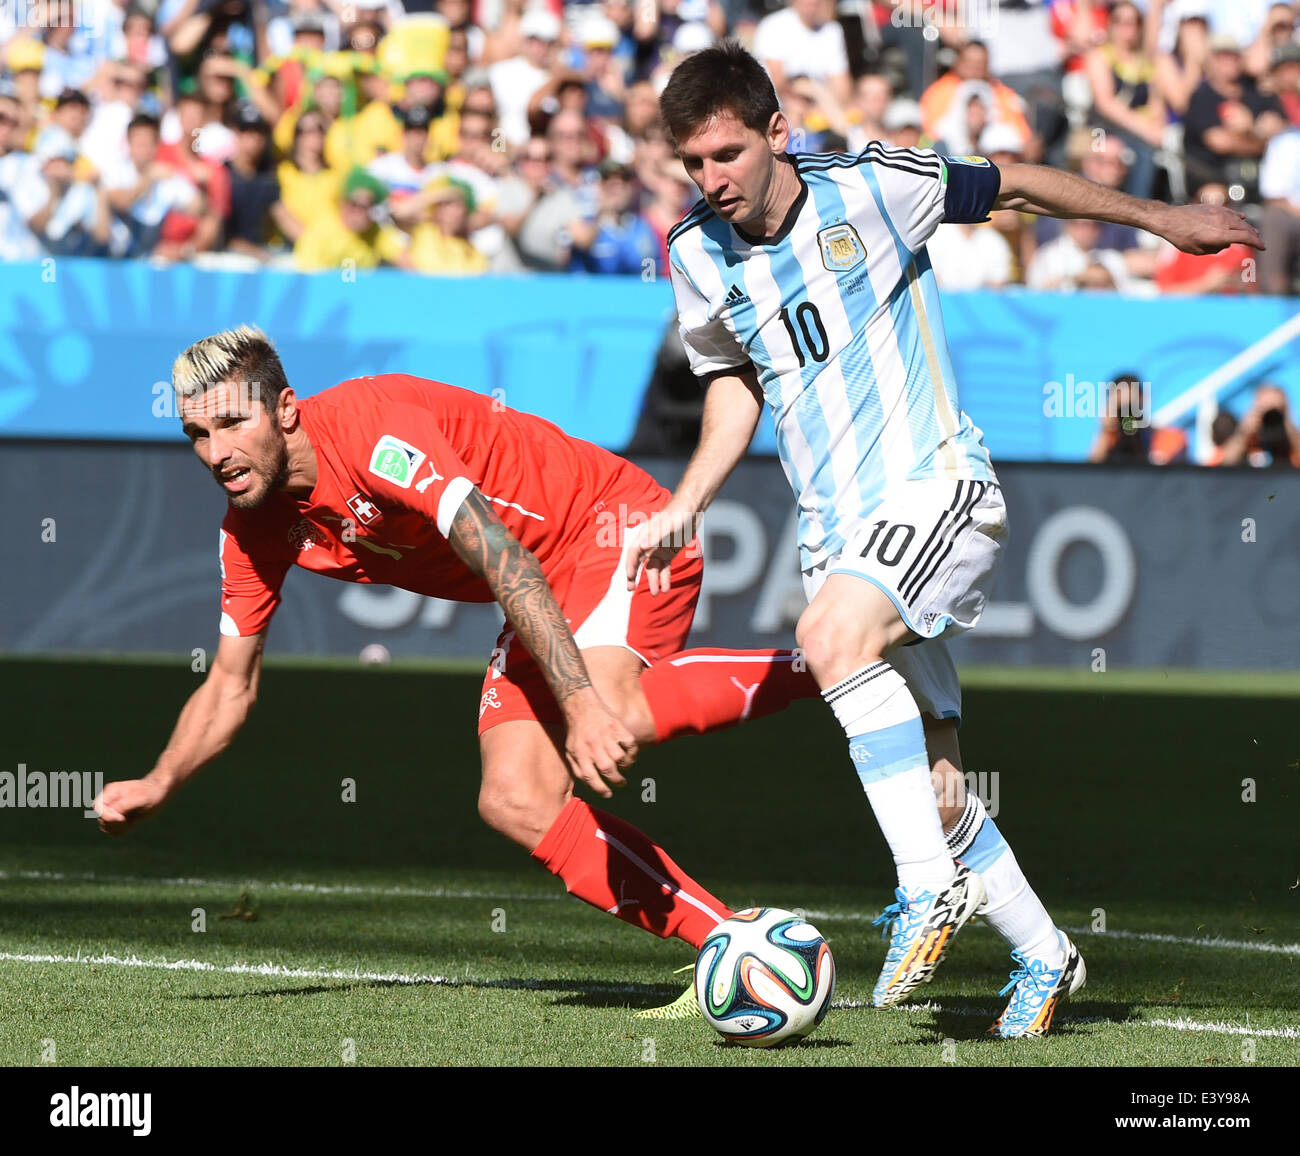 Sao Paulo, Brazil. 1st July, 2014. Argentina's Lionel Messi vies with Switzerland's Valon Behrami during a Round of 16 match between Argentina and Switzerland of 2014 FIFA World Cup at the Arena de Sao Paulo Stadium in Sao Paulo, Brazil, on July 1, 2014. Credit:  Wang Yuguo/Xinhua/Alamy Live News Stock Photo